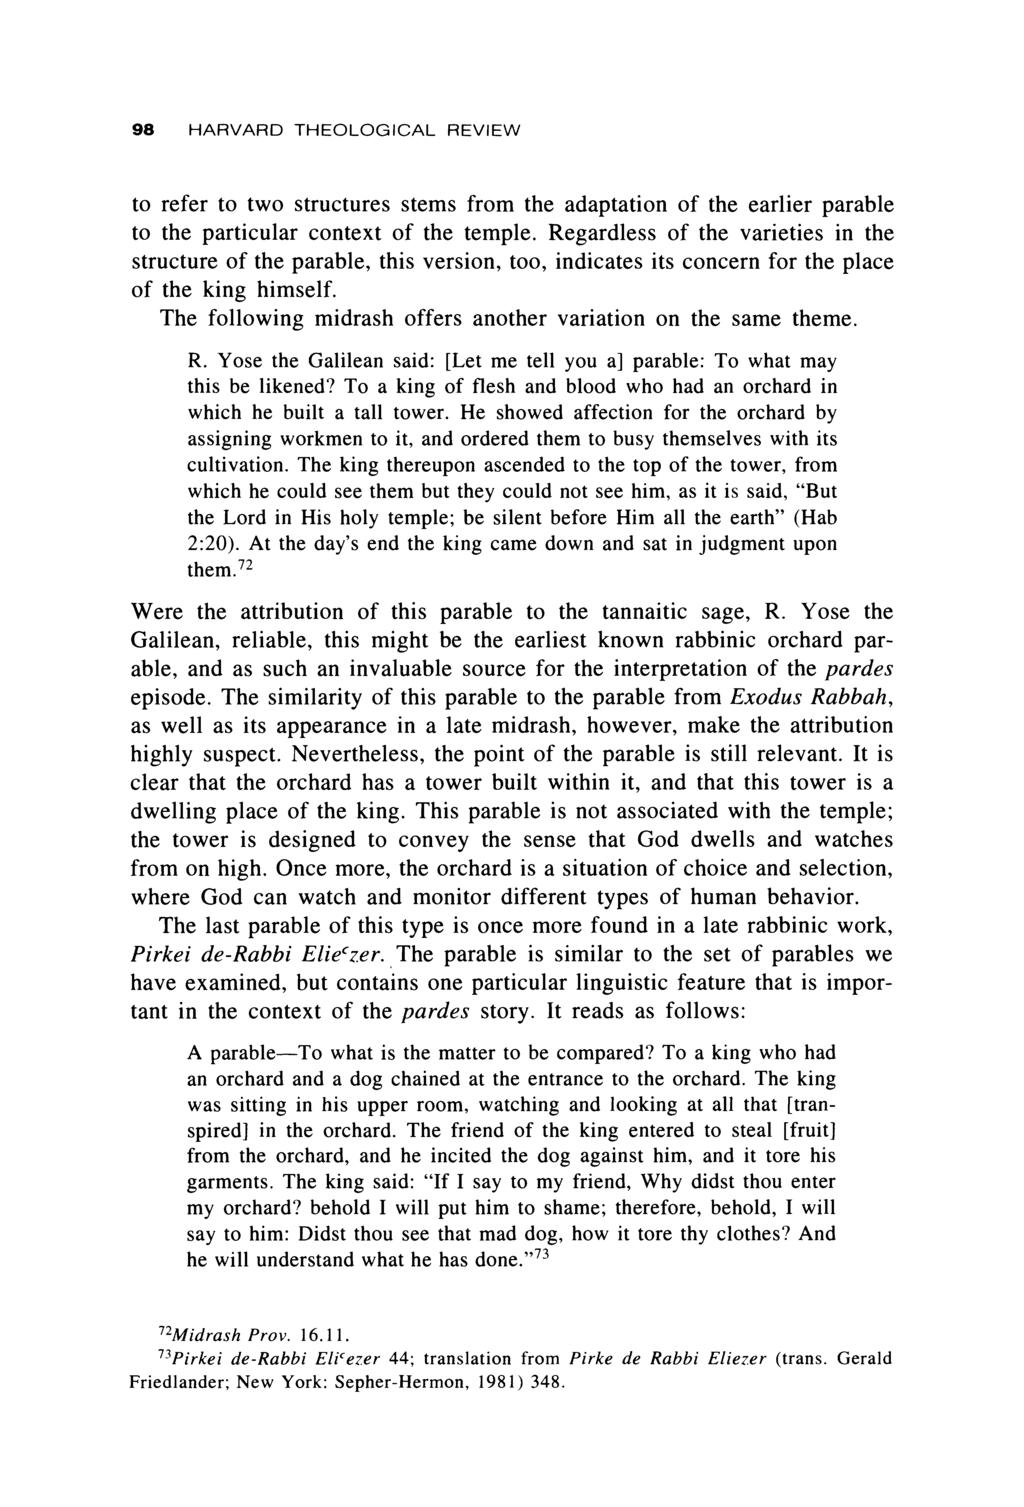 98 HARVARD THEOLOGICAL REVIEW to refer to two structures stems from the adaptation of the earlier parable to the particular context of the temple.